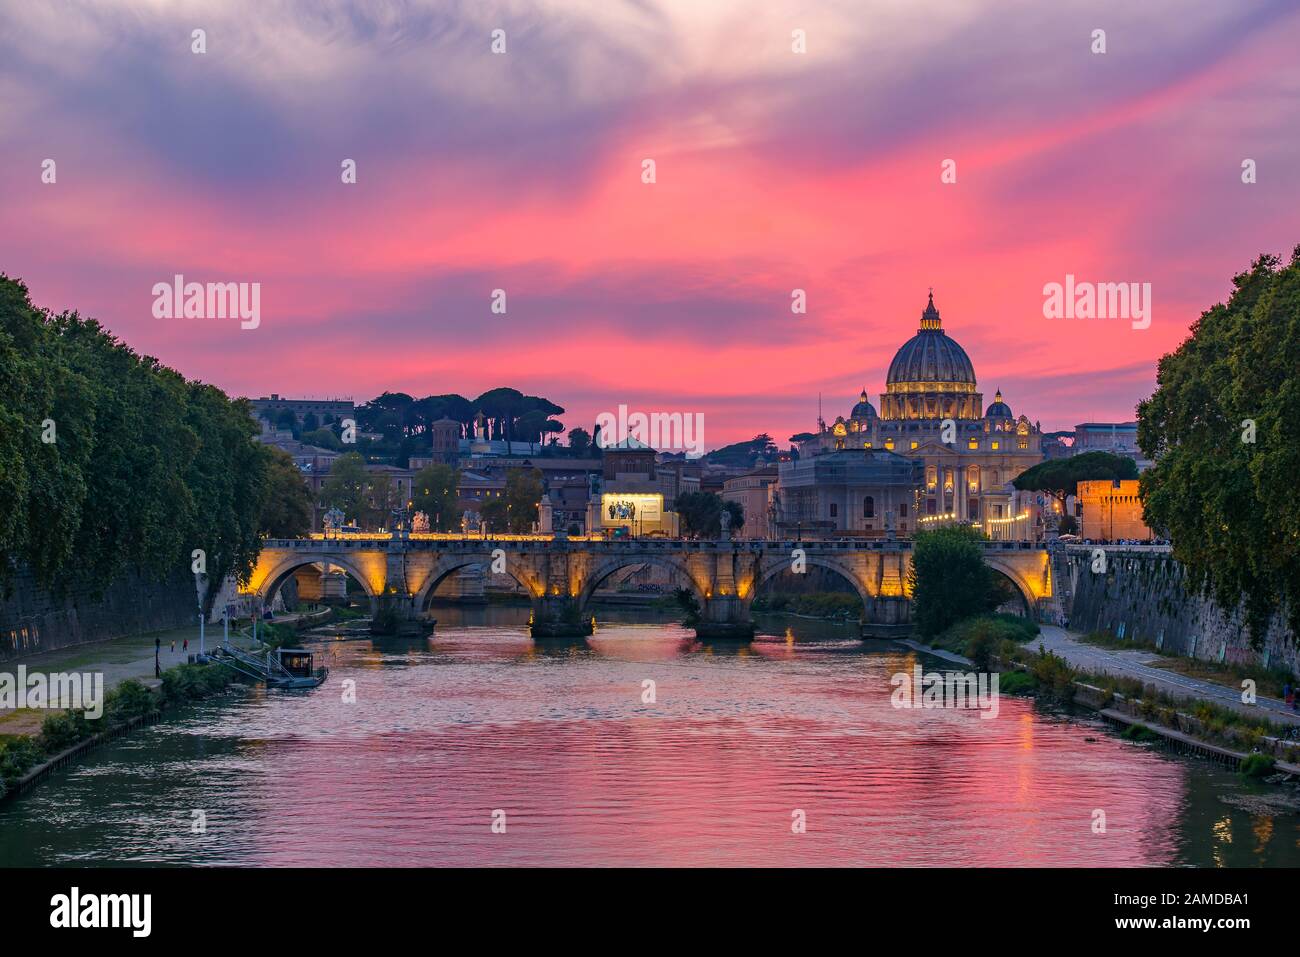 Sunset view of St. Peter's Basilica, Ponte Sant'Angelo, and Tiber River in Rome, Italy Stock Photo